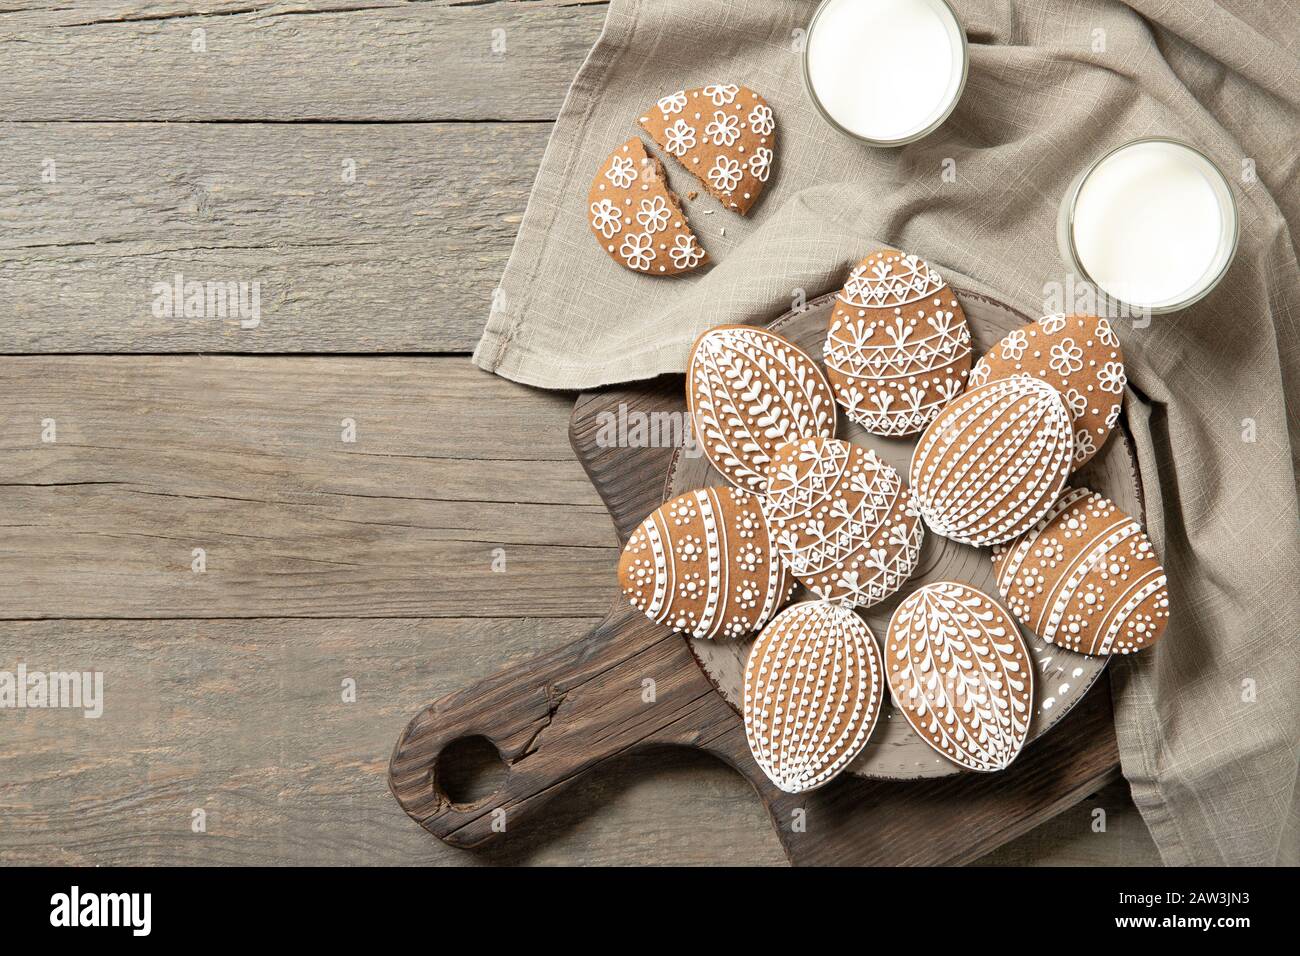 beautiful easter cookies on a plate, a glass of milk. On old wooden background Stock Photo